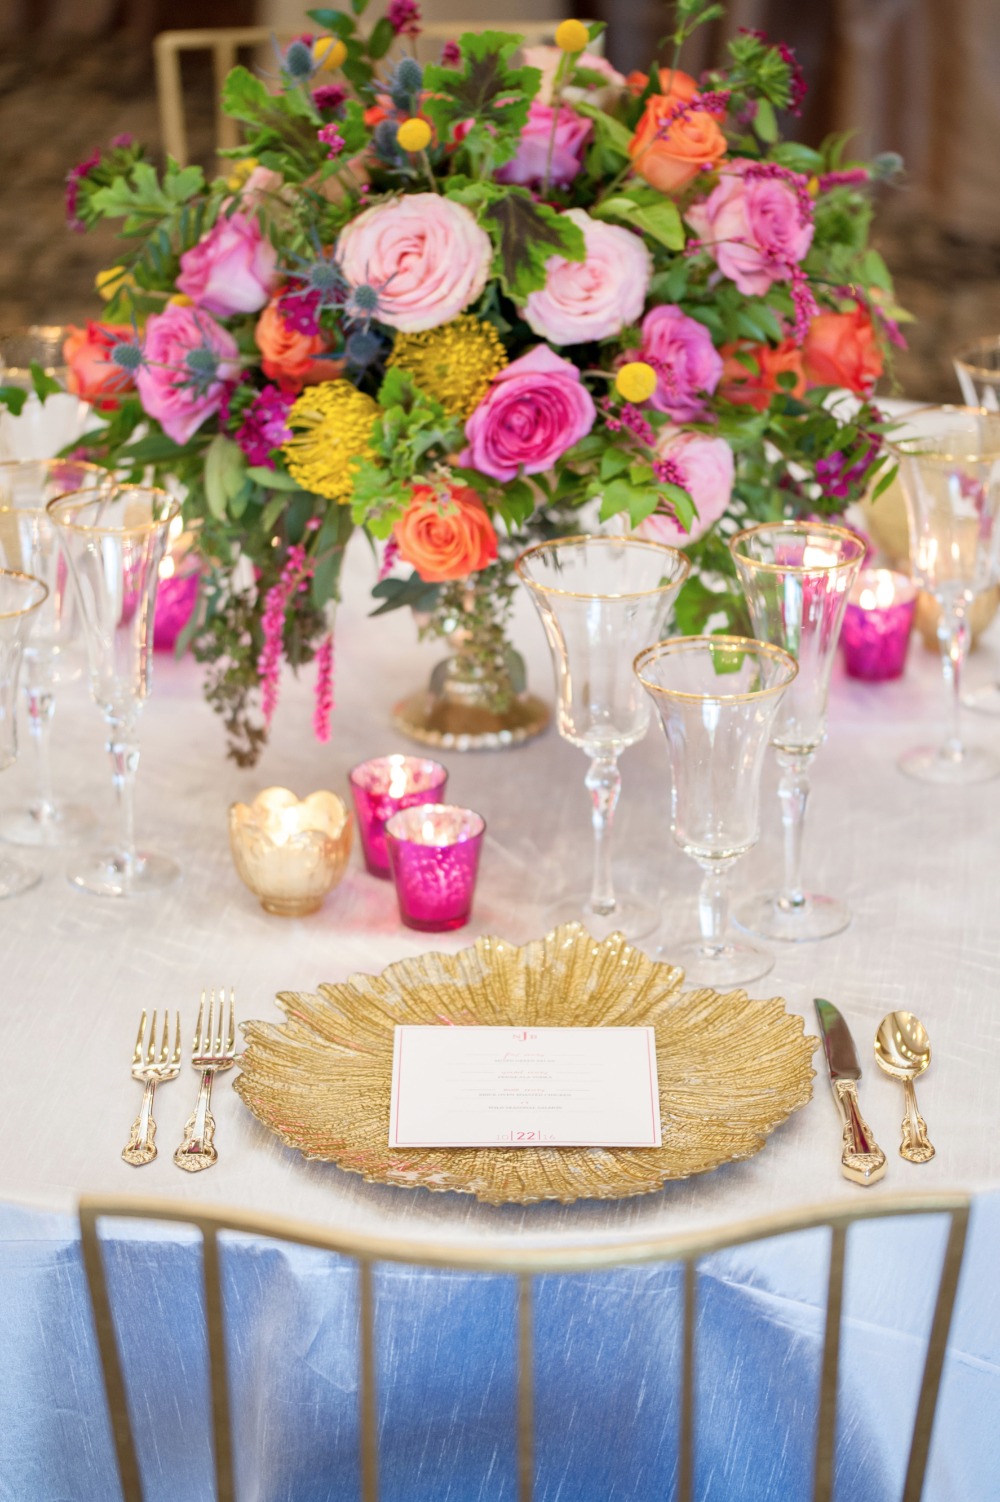 Simple and elegant table decor with gold accents